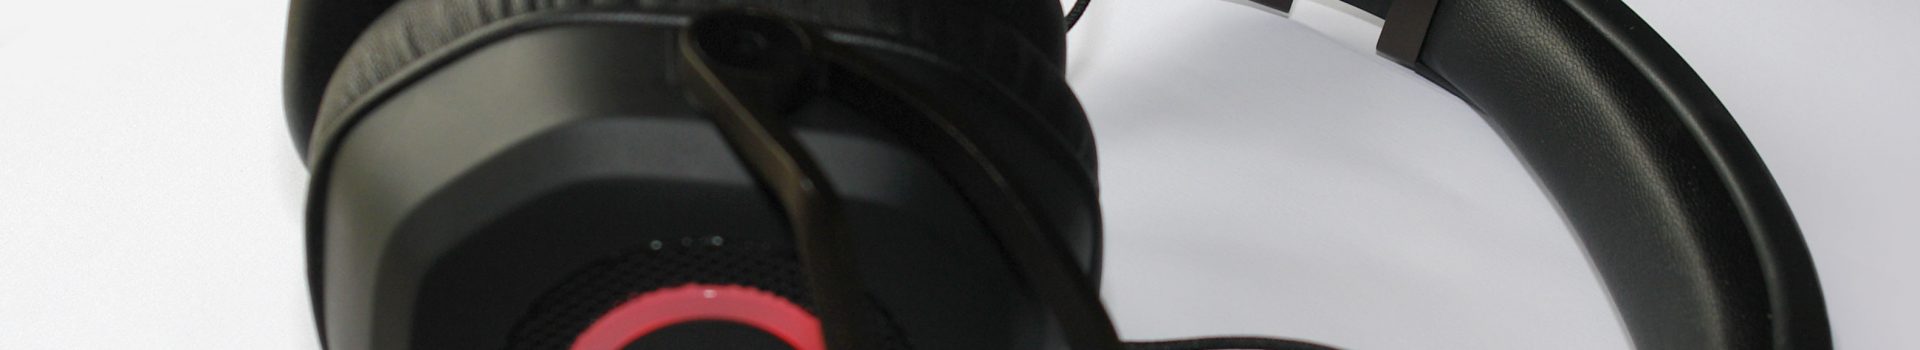 [Review] Teufel Cage | Gaming Headset